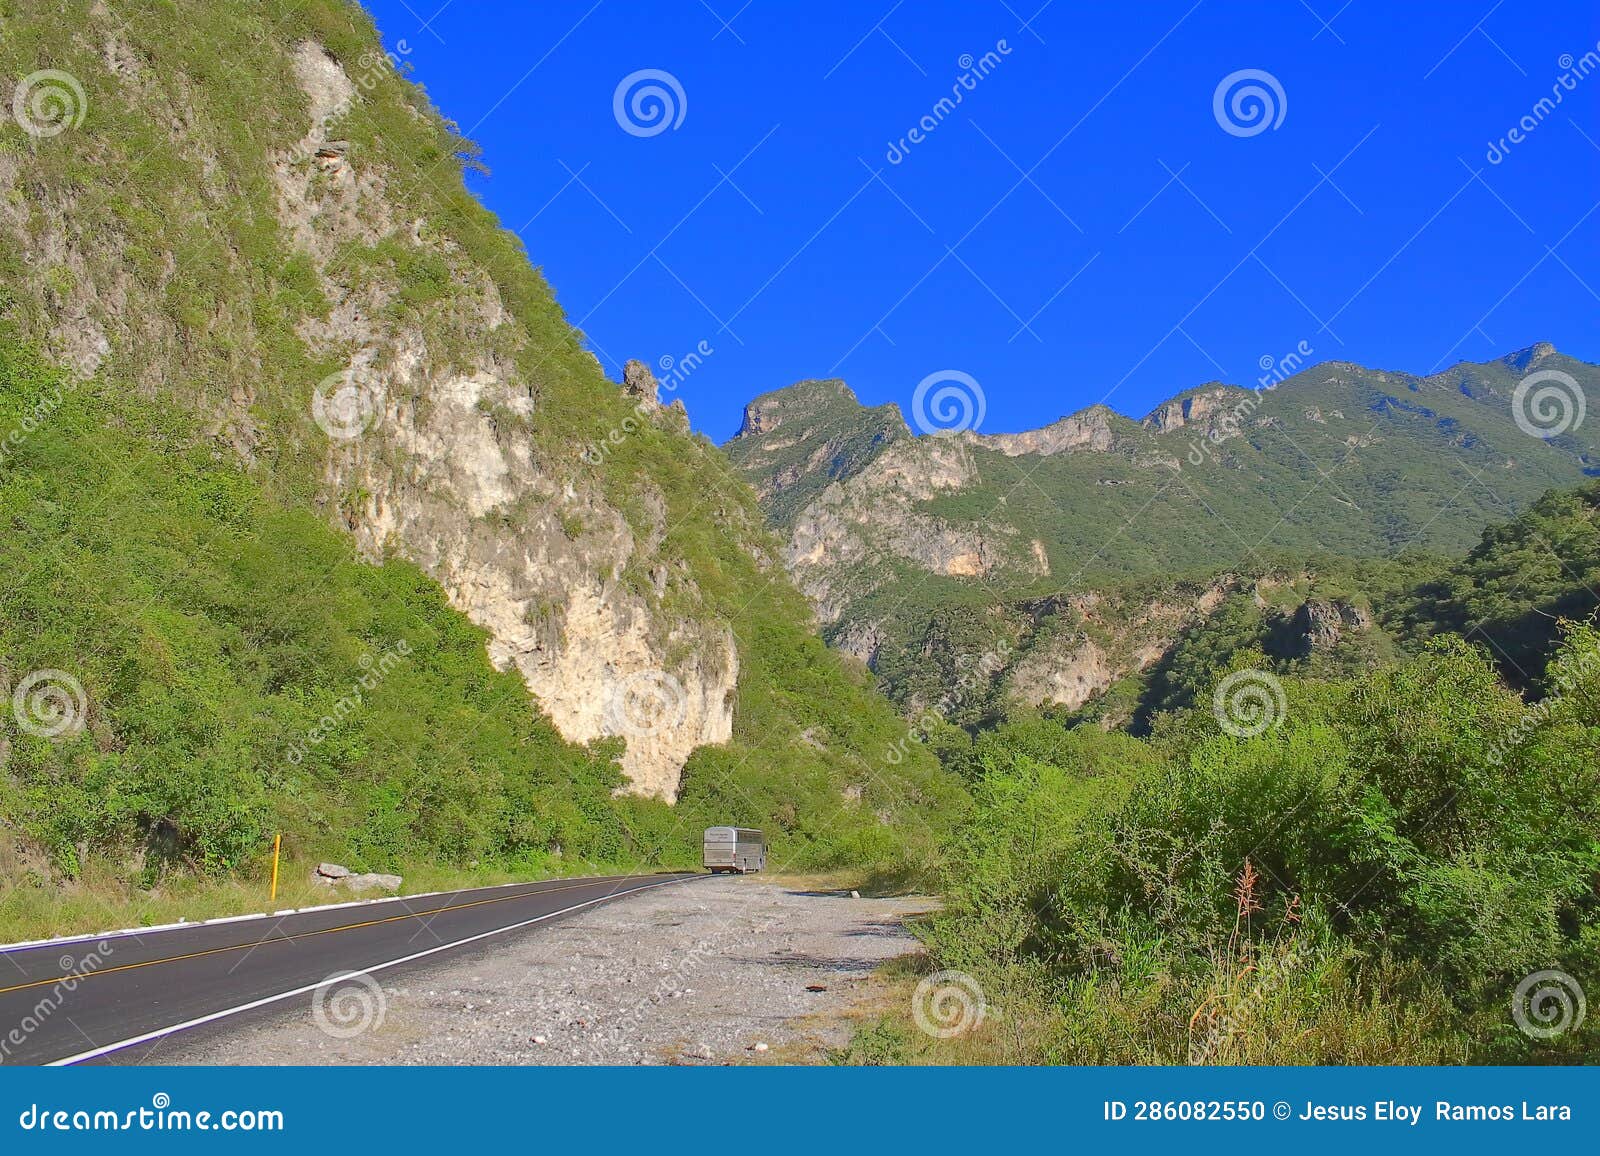 mountains and road in nuevo leon, mexico vii